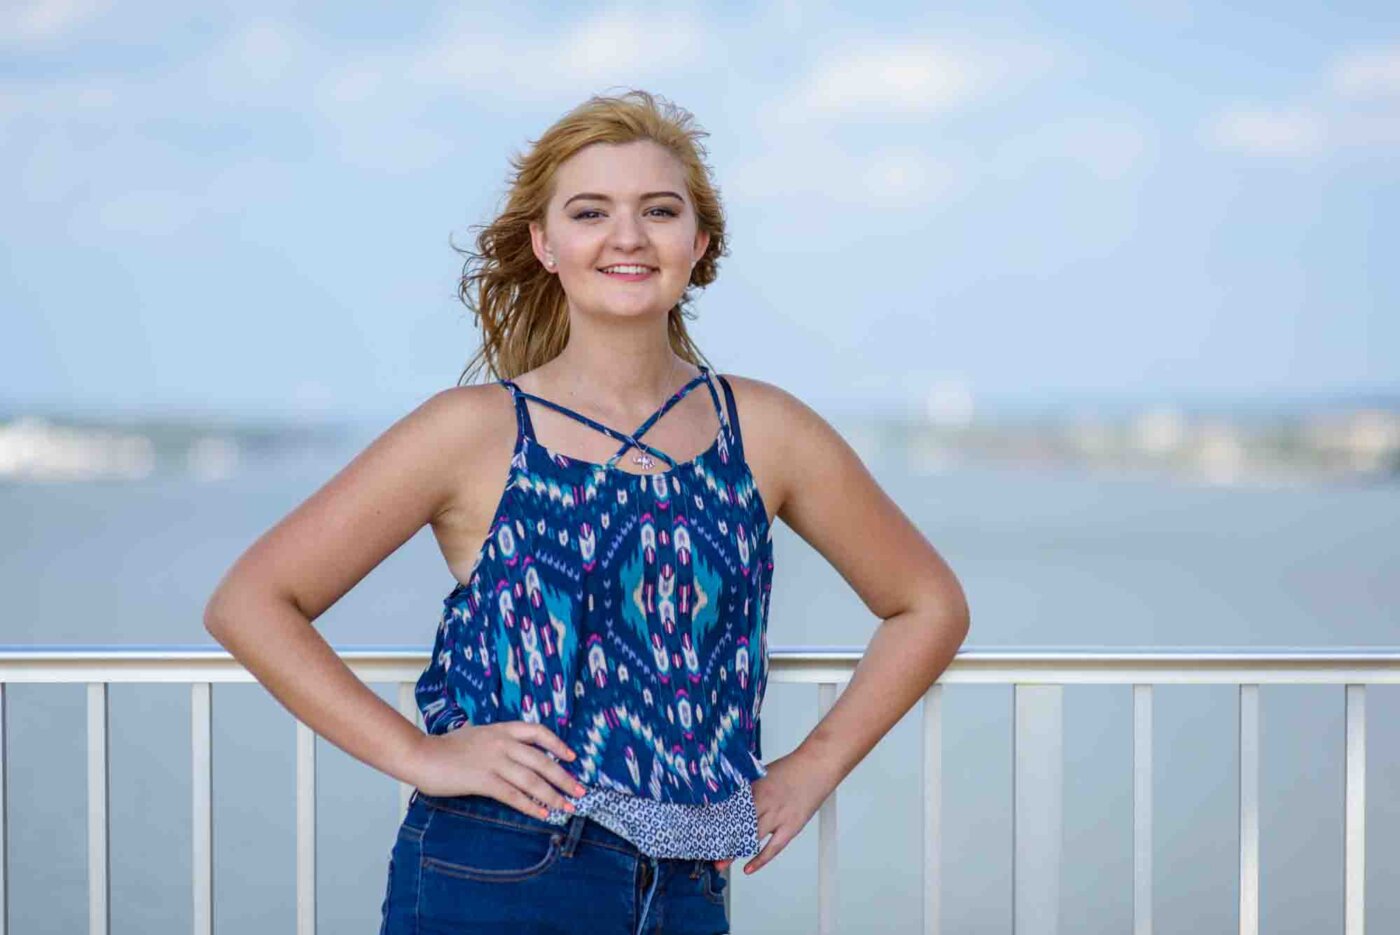 A senior portrait session with Meagan Nye on the Big Four Bridge, Labor Day, September 4, 2017 in Louisville, Ky.